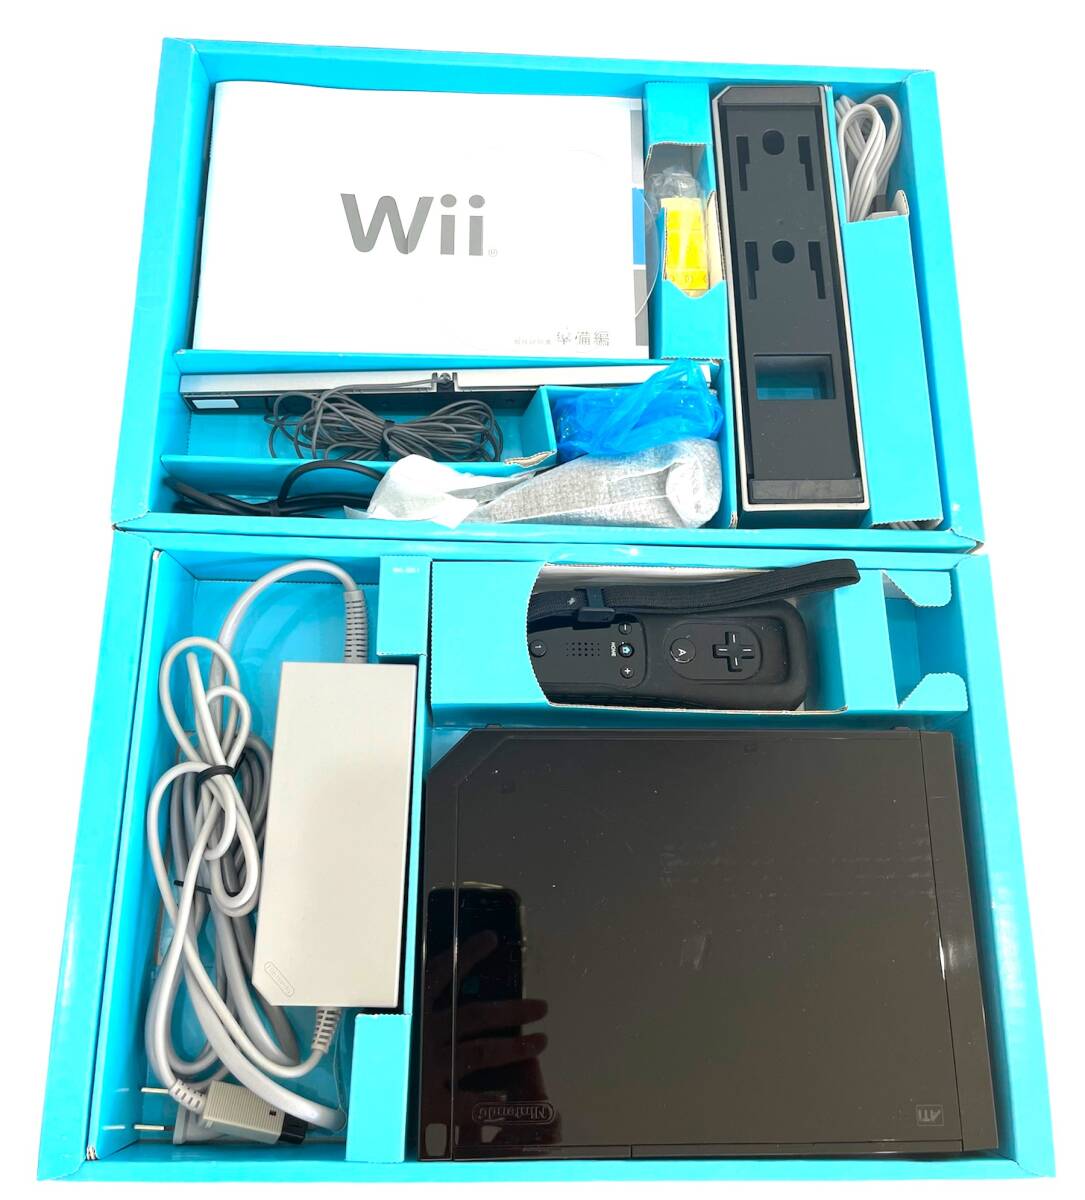  used * beautiful goods NINTENDO nintendo Wii video game machine body peripherals set black remote control plus HDMI cable attaching /3368